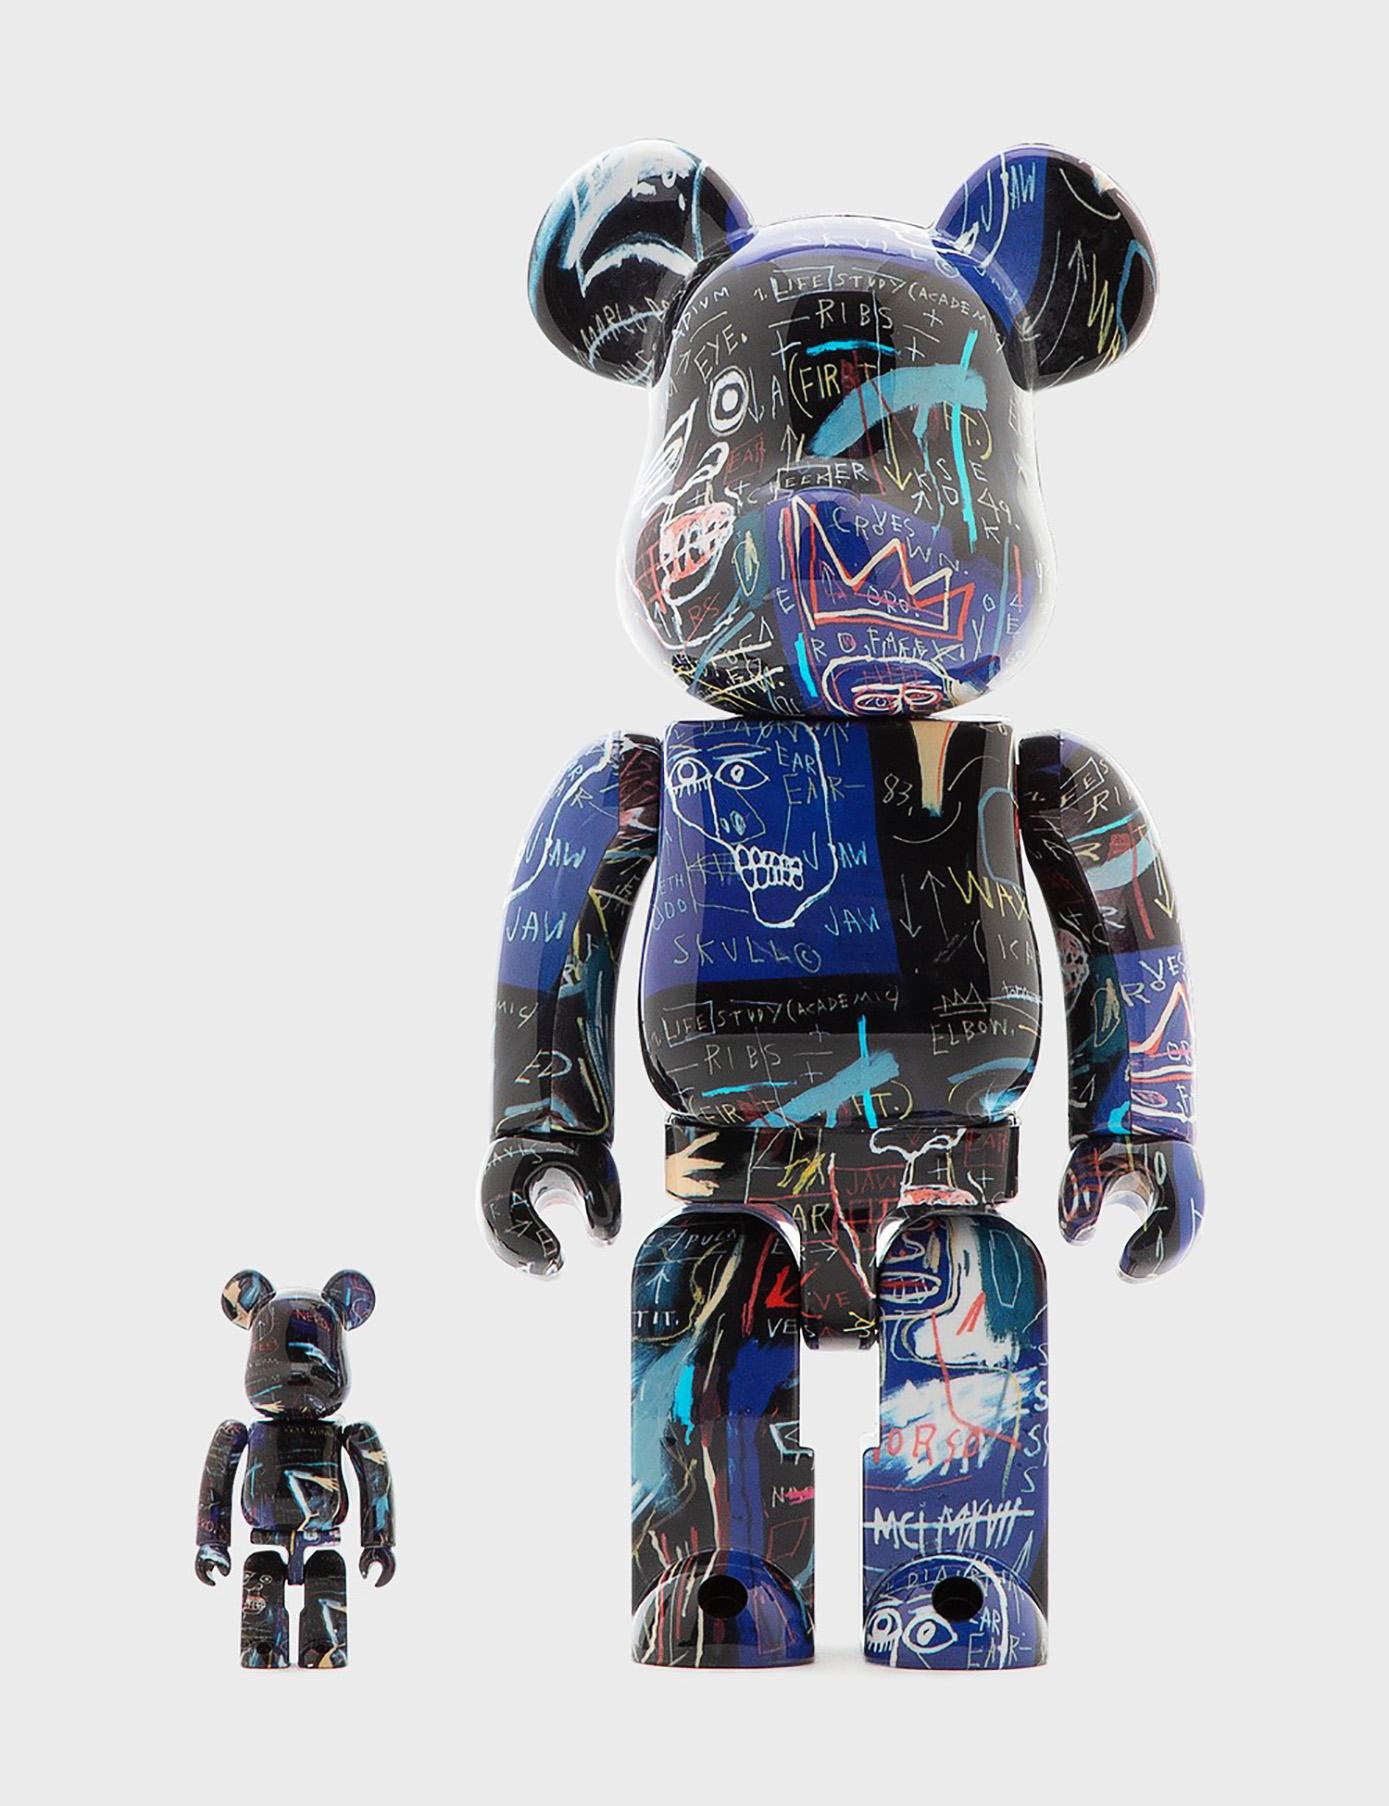 Jean-Michel Basquiat Bearbrick 400% Figures: Set of two works:
Unique, timeless collectibles trademarked & licensed by the Estate of Jean-Michel Basquiat This set reveals details from Jean-Michel Basquiat’s licensed early 1980s work wrapping the